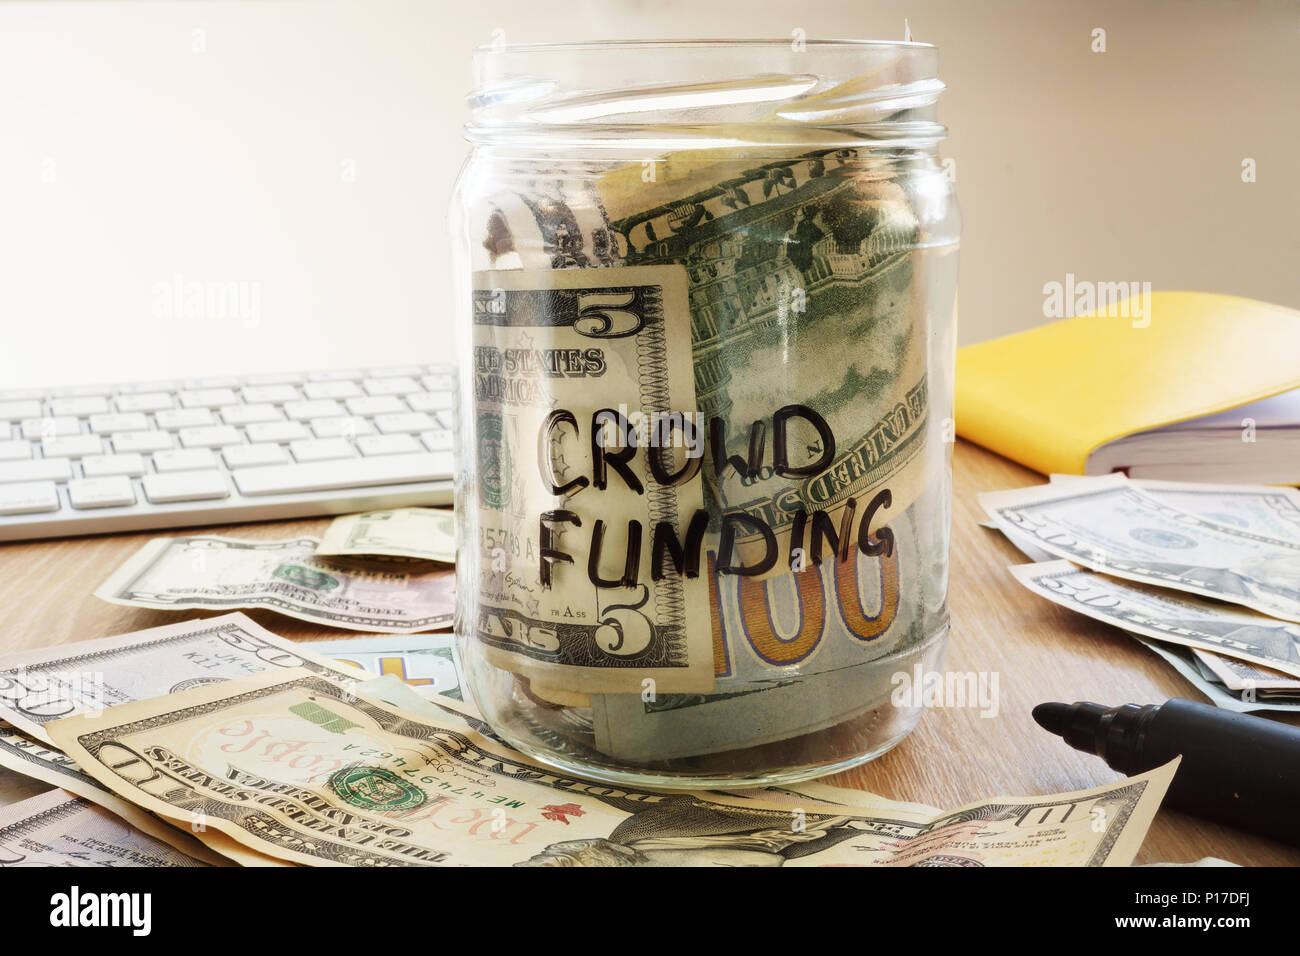 Crowdfunding written on a jar with dollars. Stock Photo